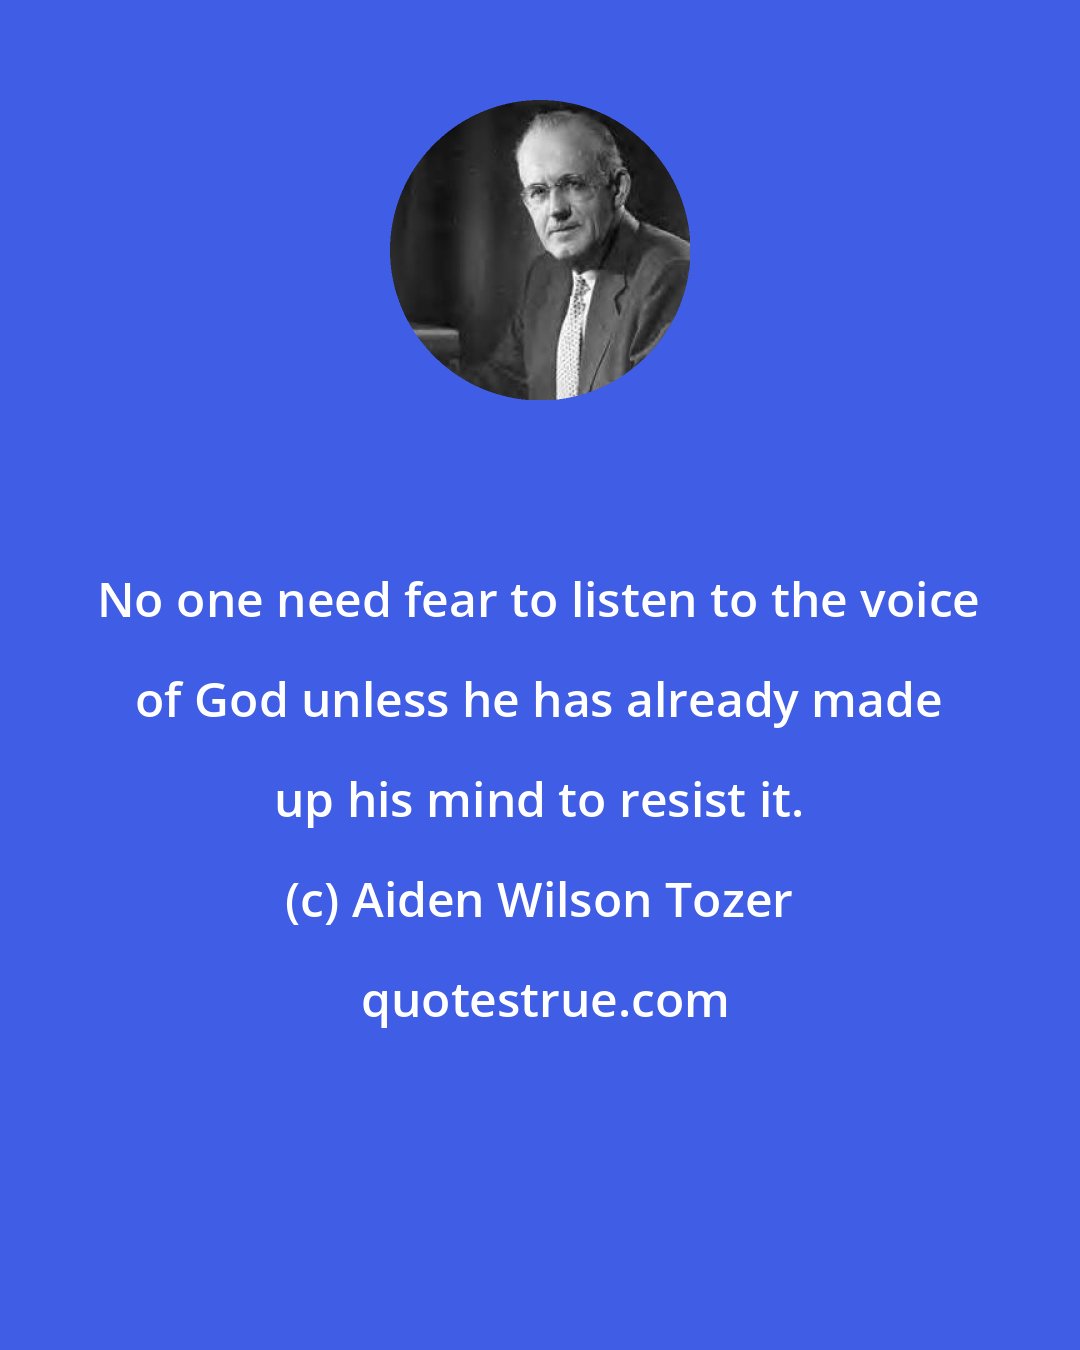 Aiden Wilson Tozer: No one need fear to listen to the voice of God unless he has already made up his mind to resist it.